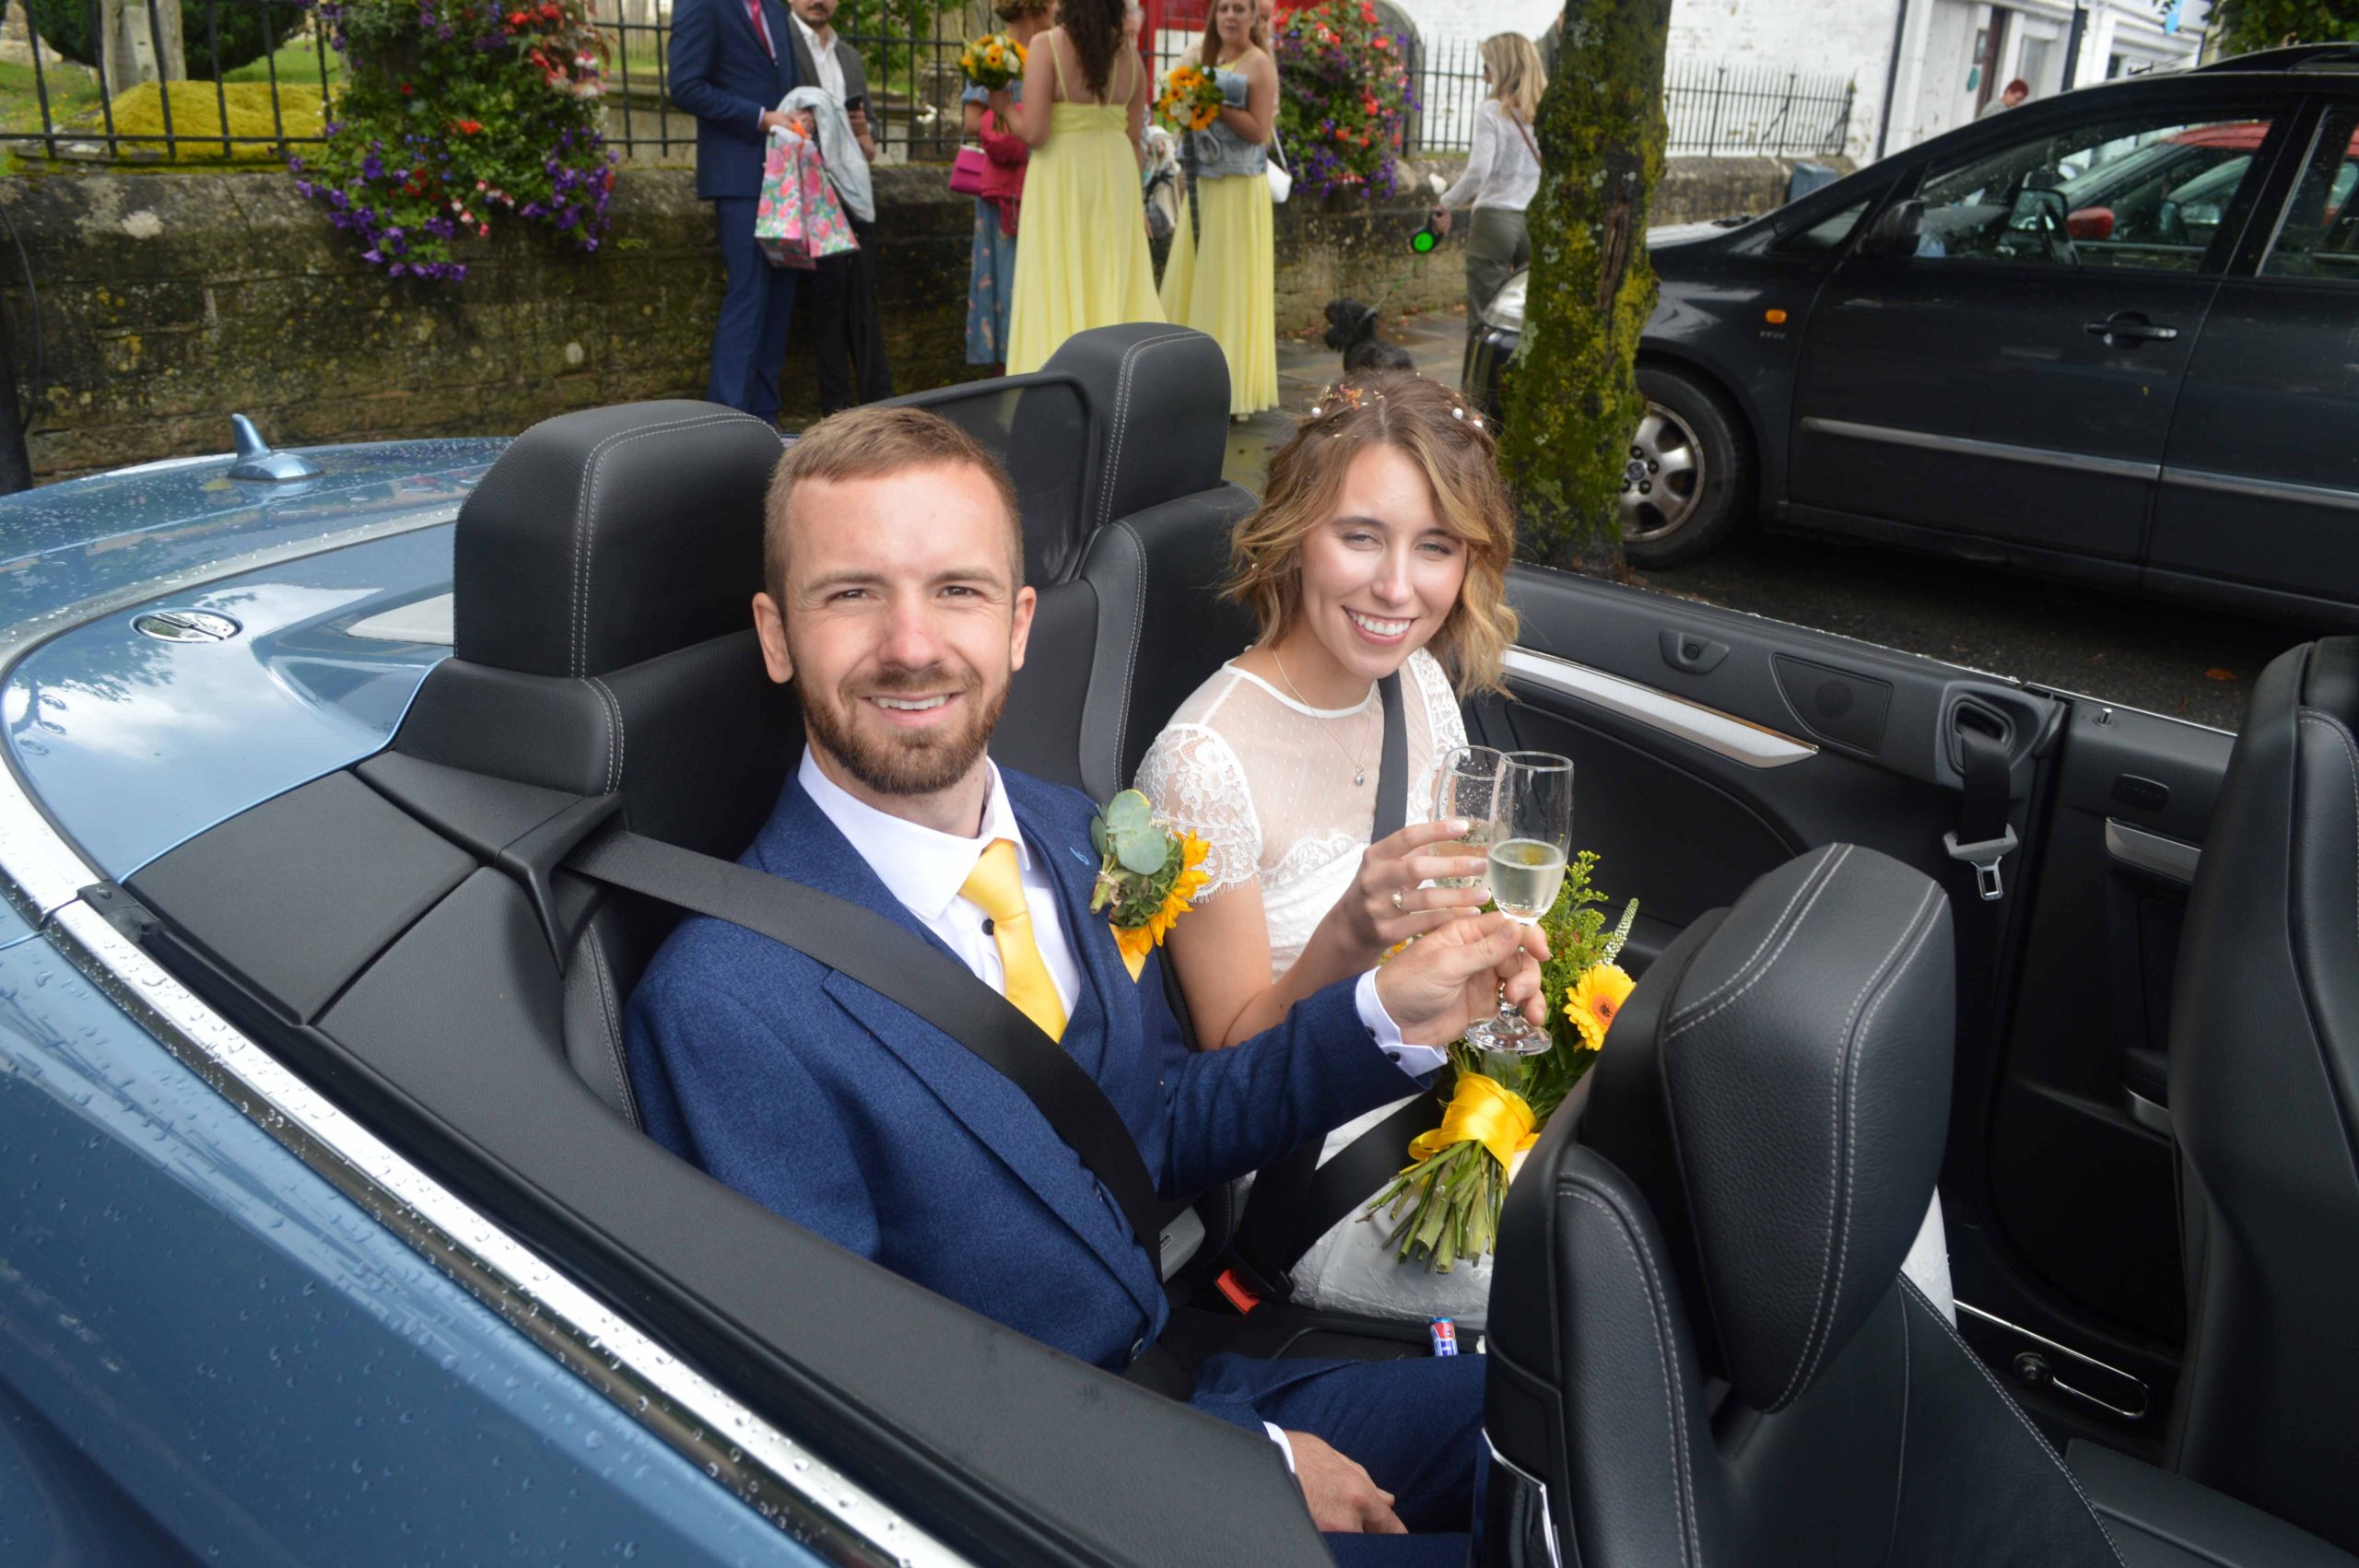 Royal Wootton Bassett wedding for Kirsty and Stephen 5 August 2023